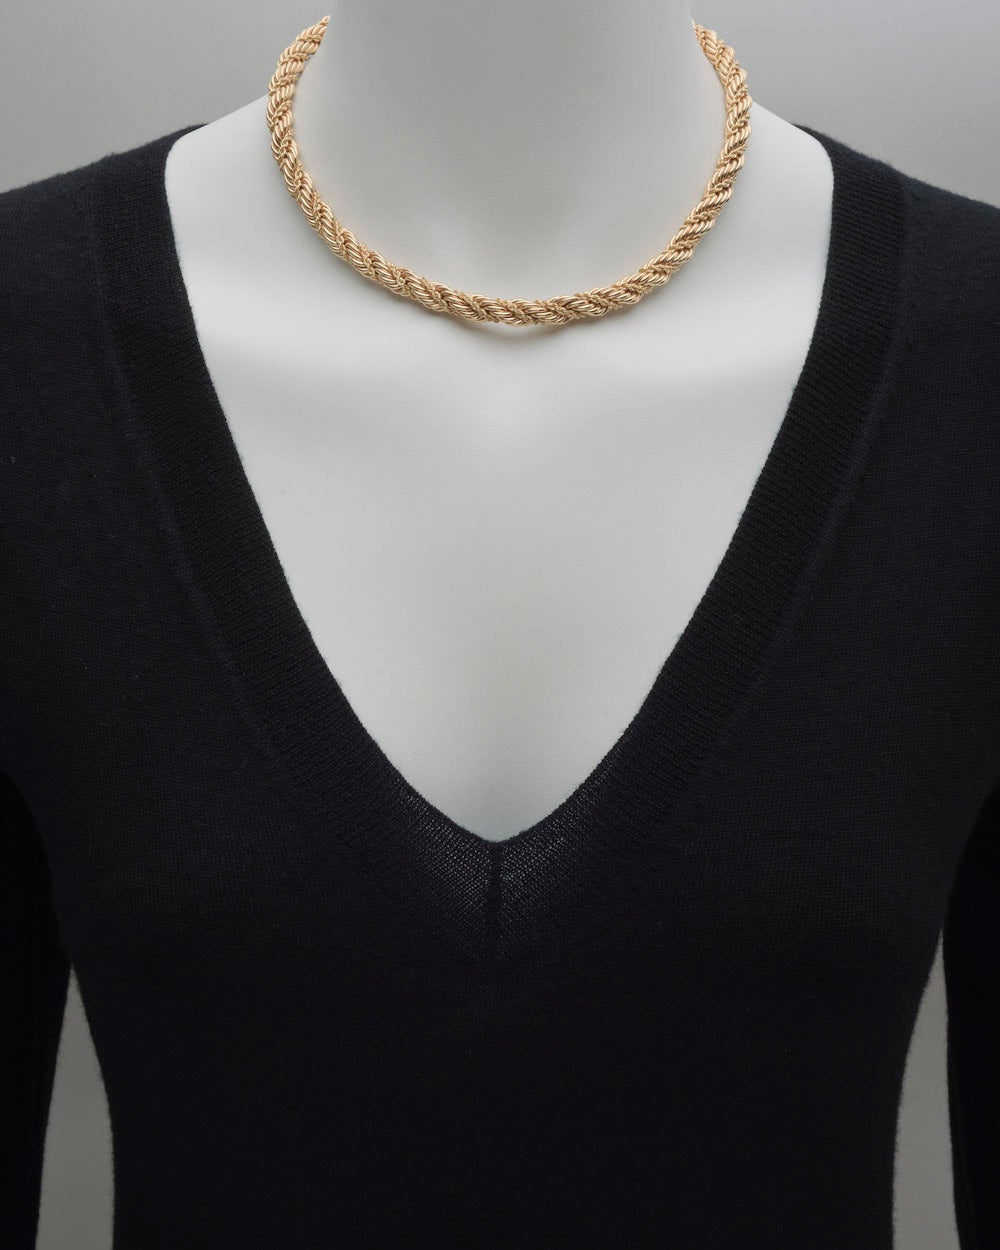 Woven rope-twist collar necklace, in 14k yellow gold, signed Tiffany & Co. 16